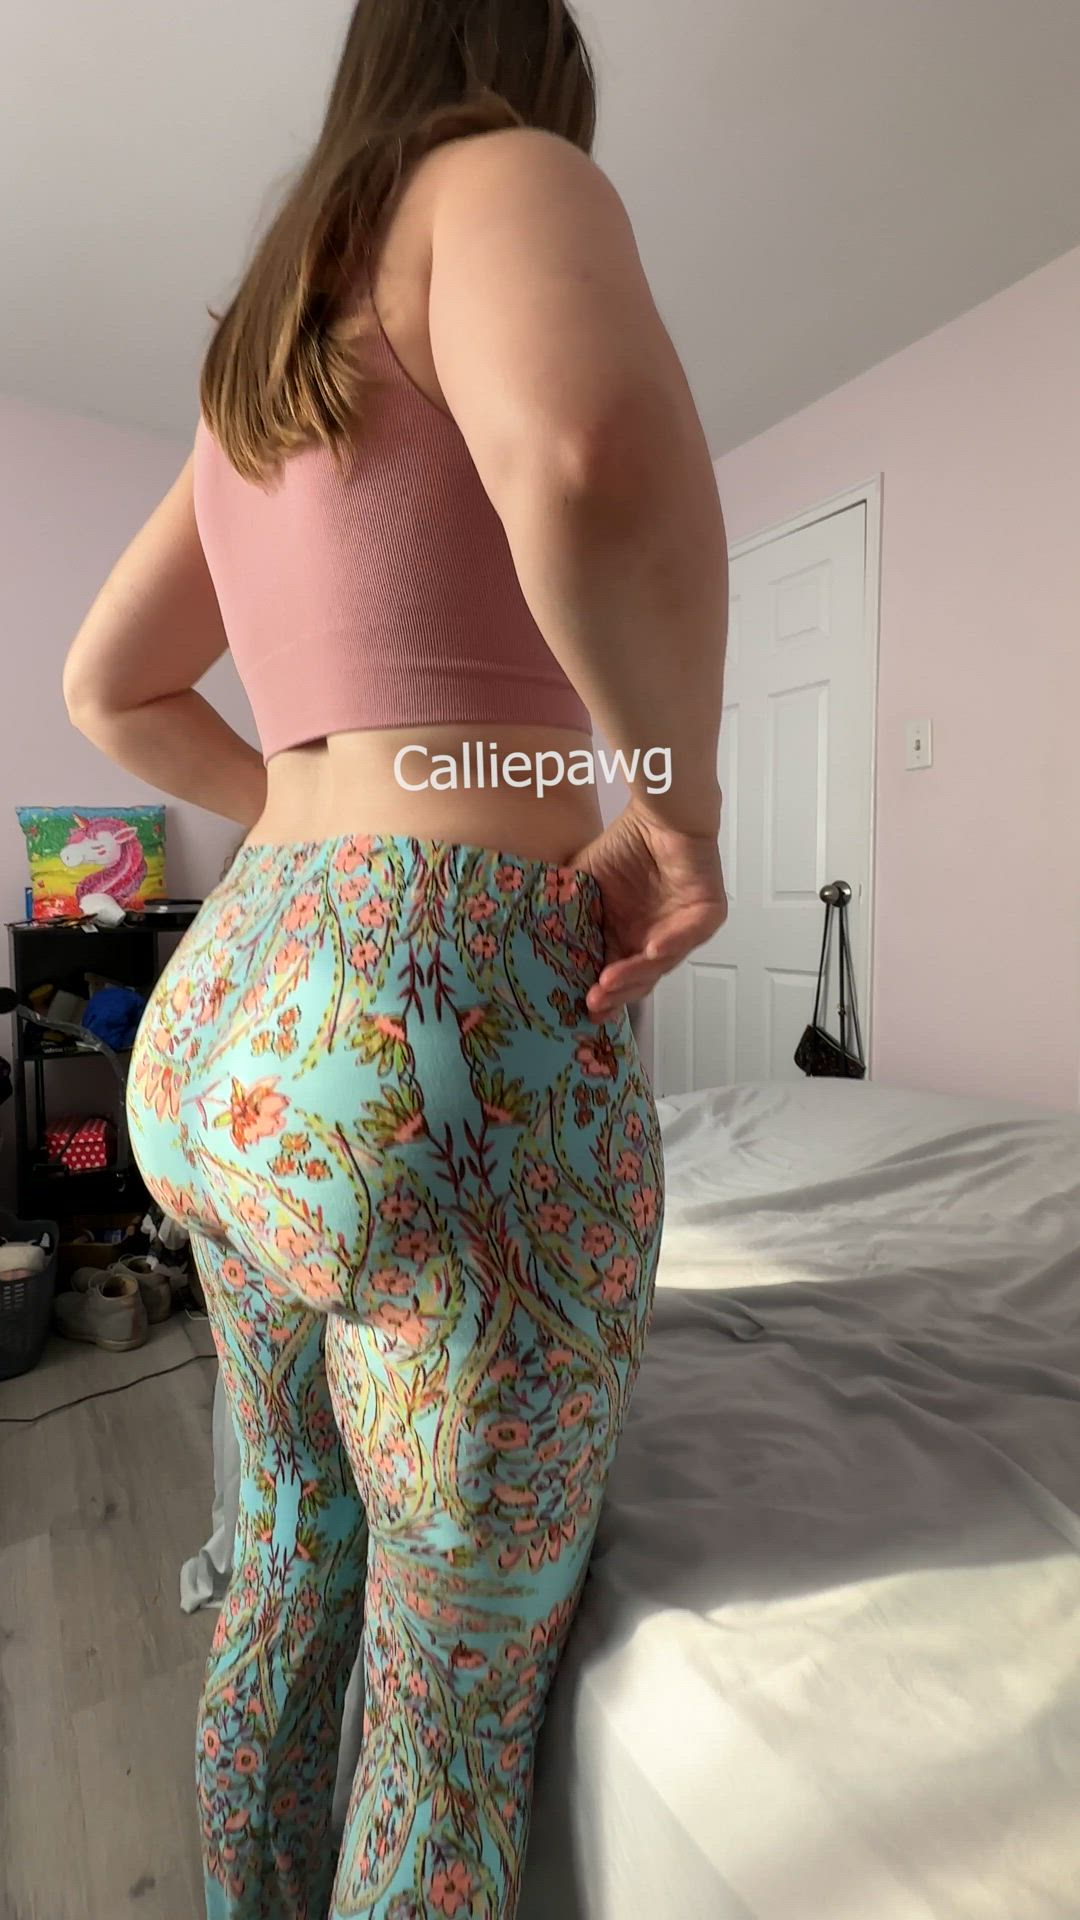 Ass porn video with onlyfans model calliepawg <strong>@calliepawg</strong>